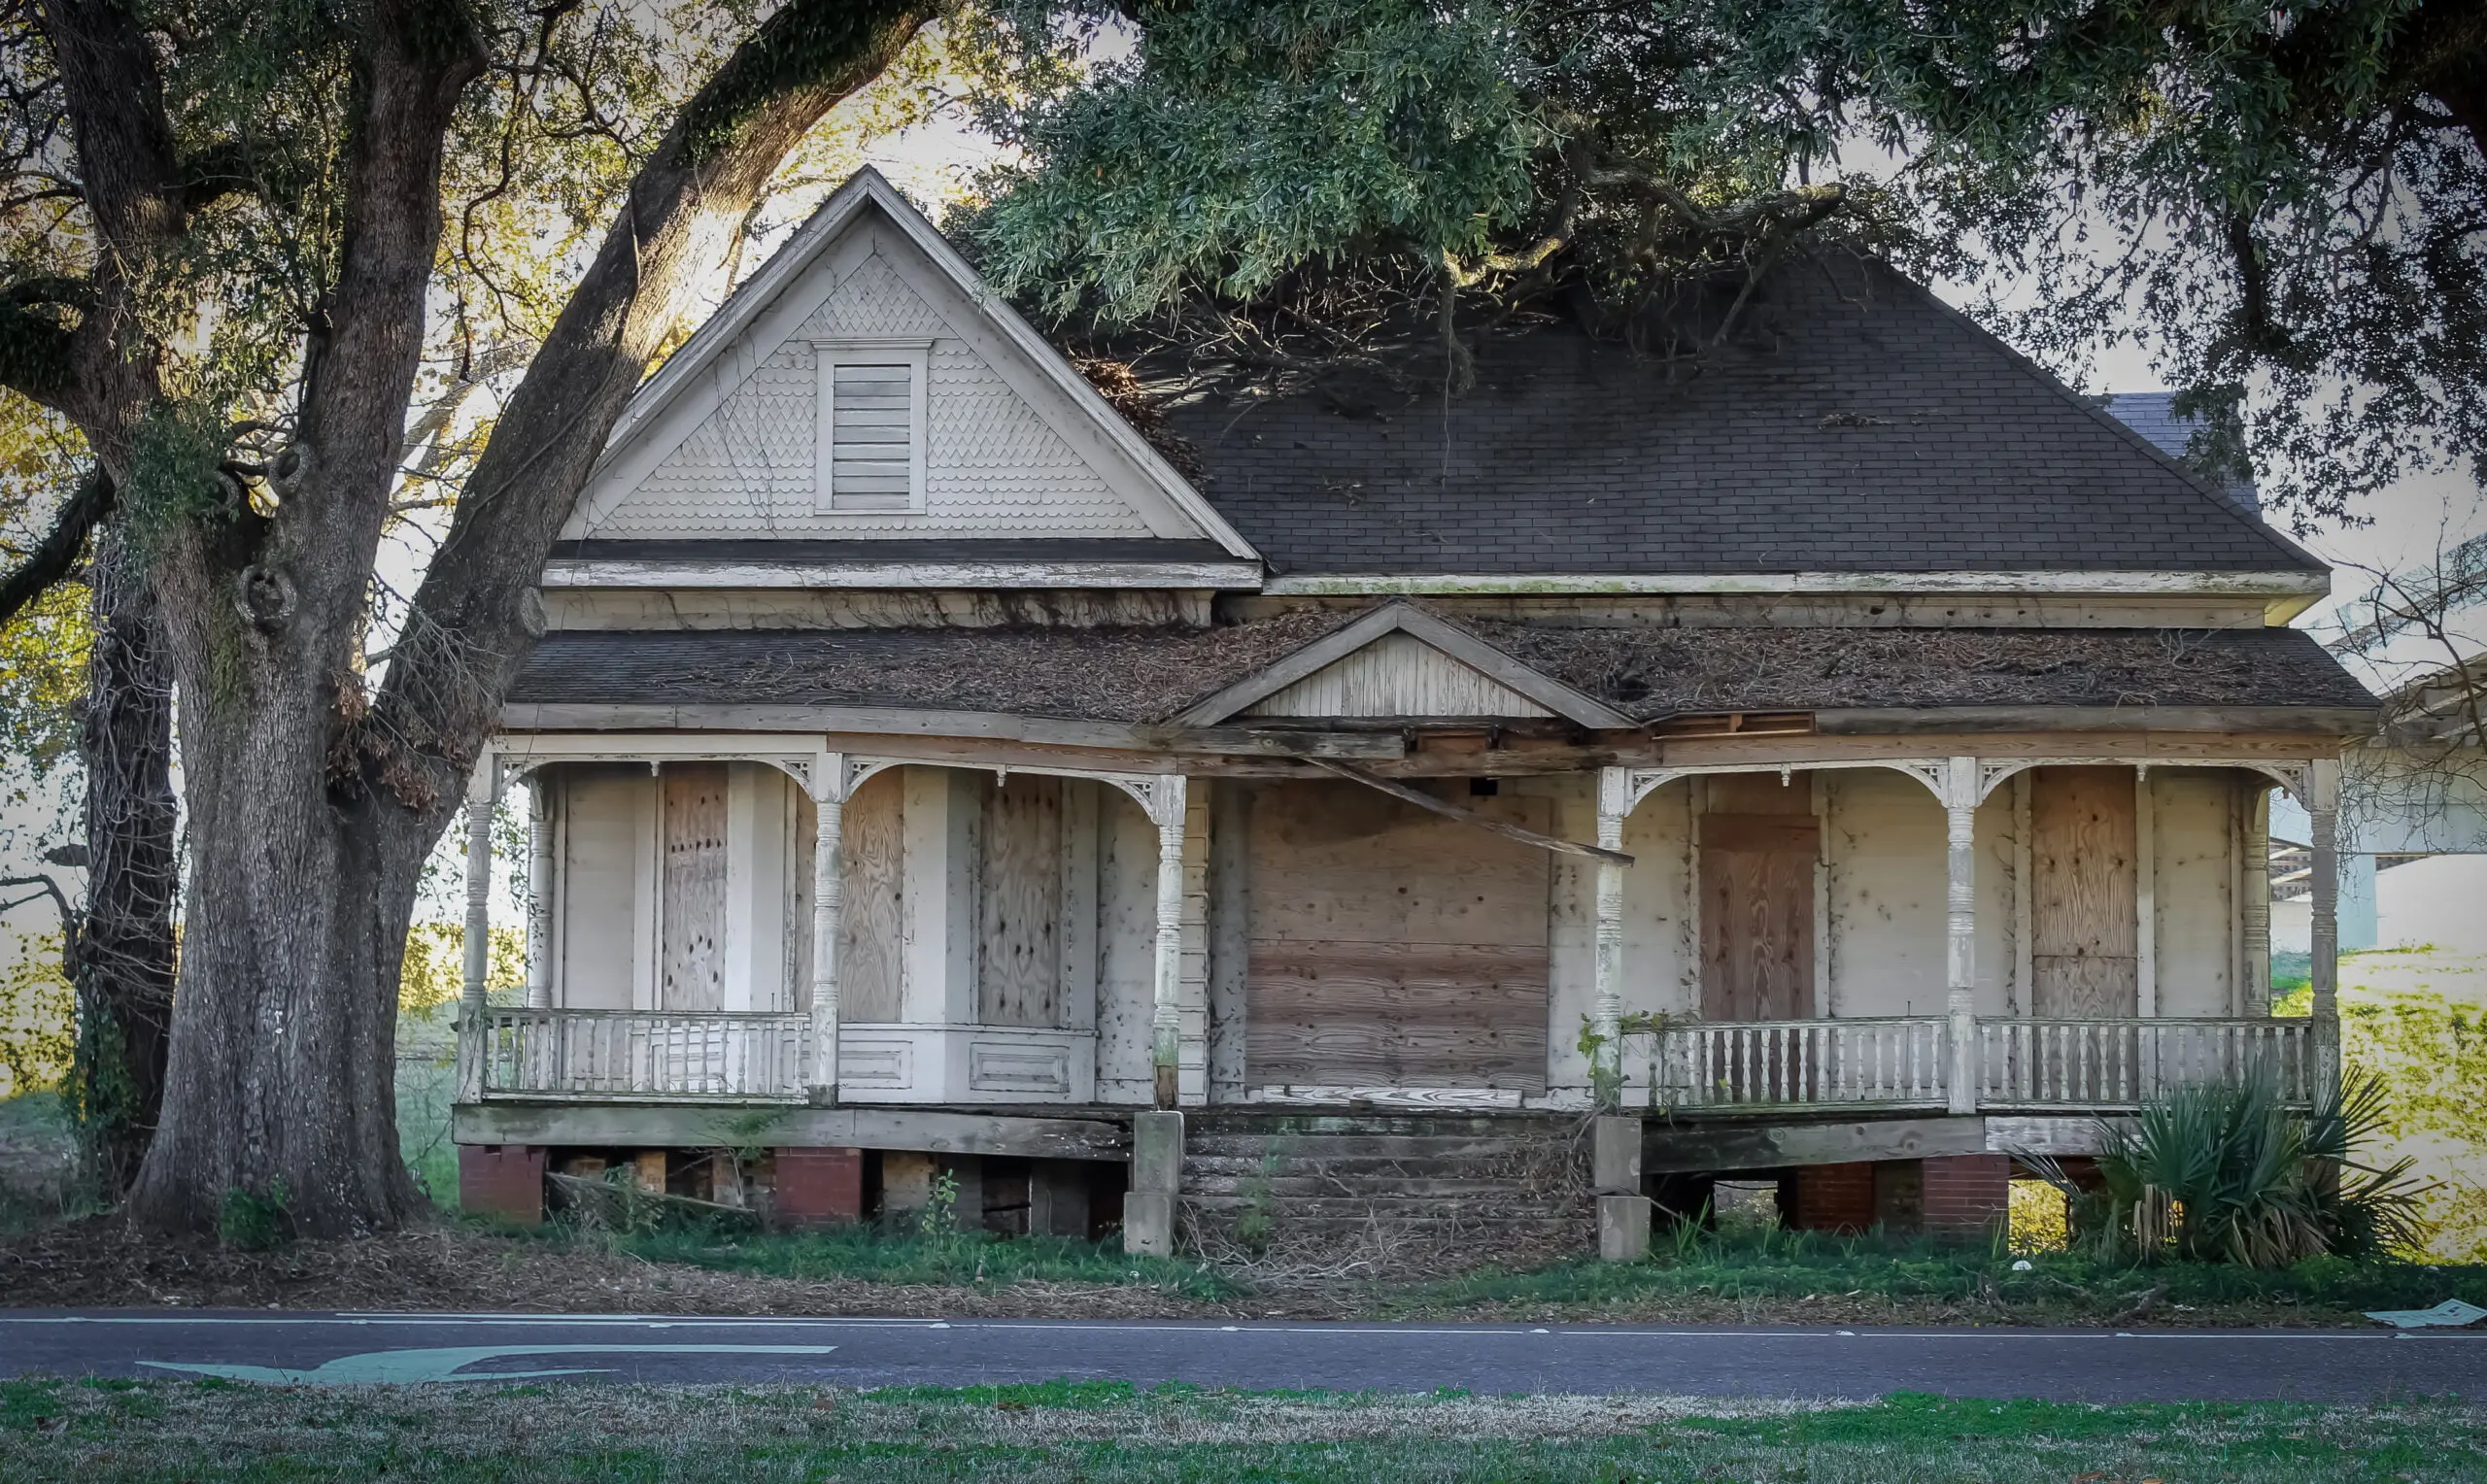 How to Sell a Fixer-Upper, Selling House As-Is